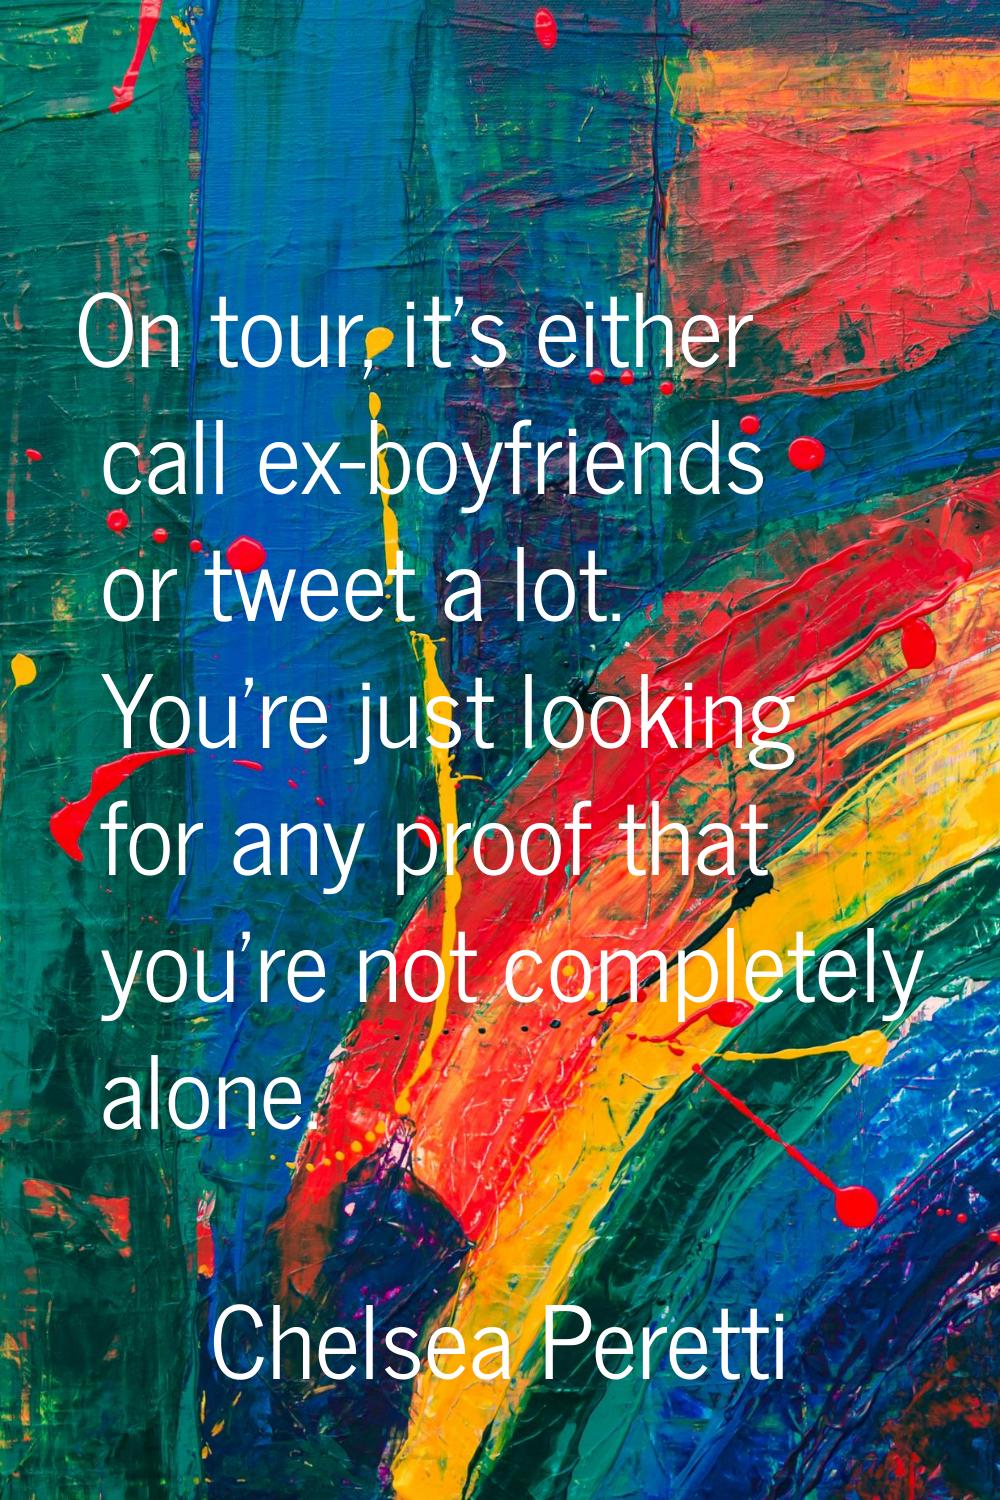 On tour, it's either call ex-boyfriends or tweet a lot. You're just looking for any proof that you'